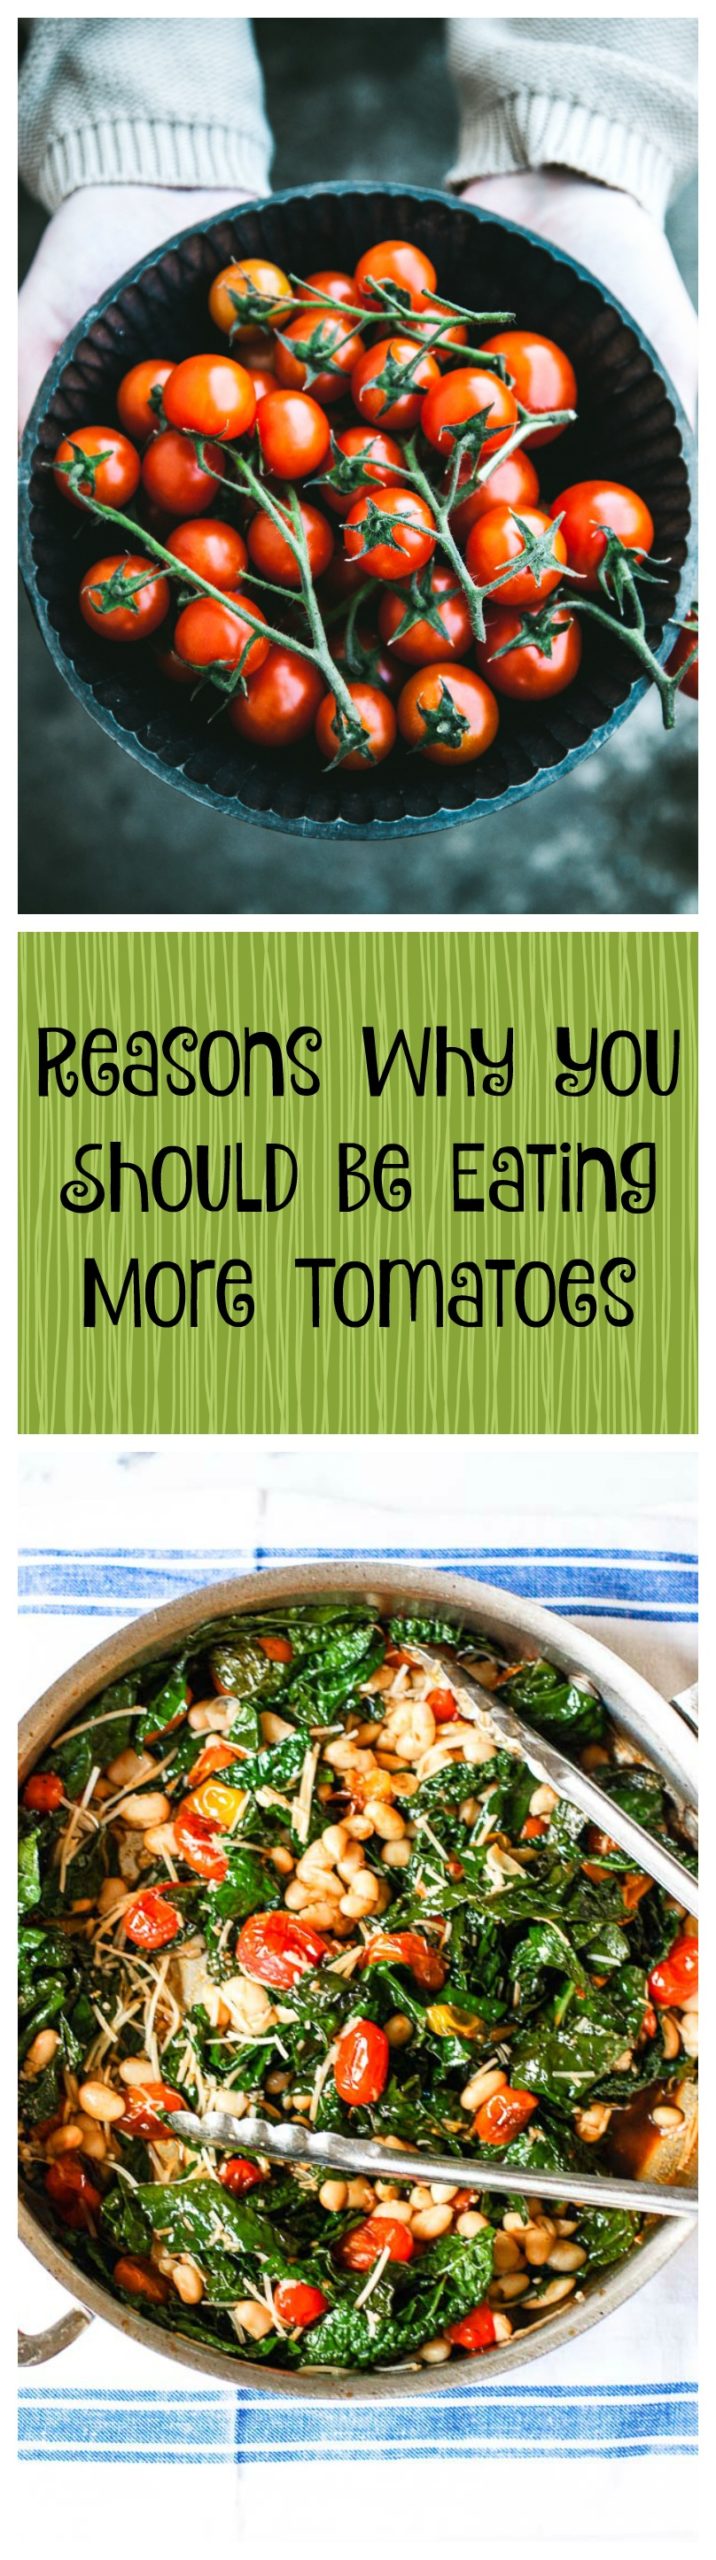 reasons why you should be eating more tomatoes